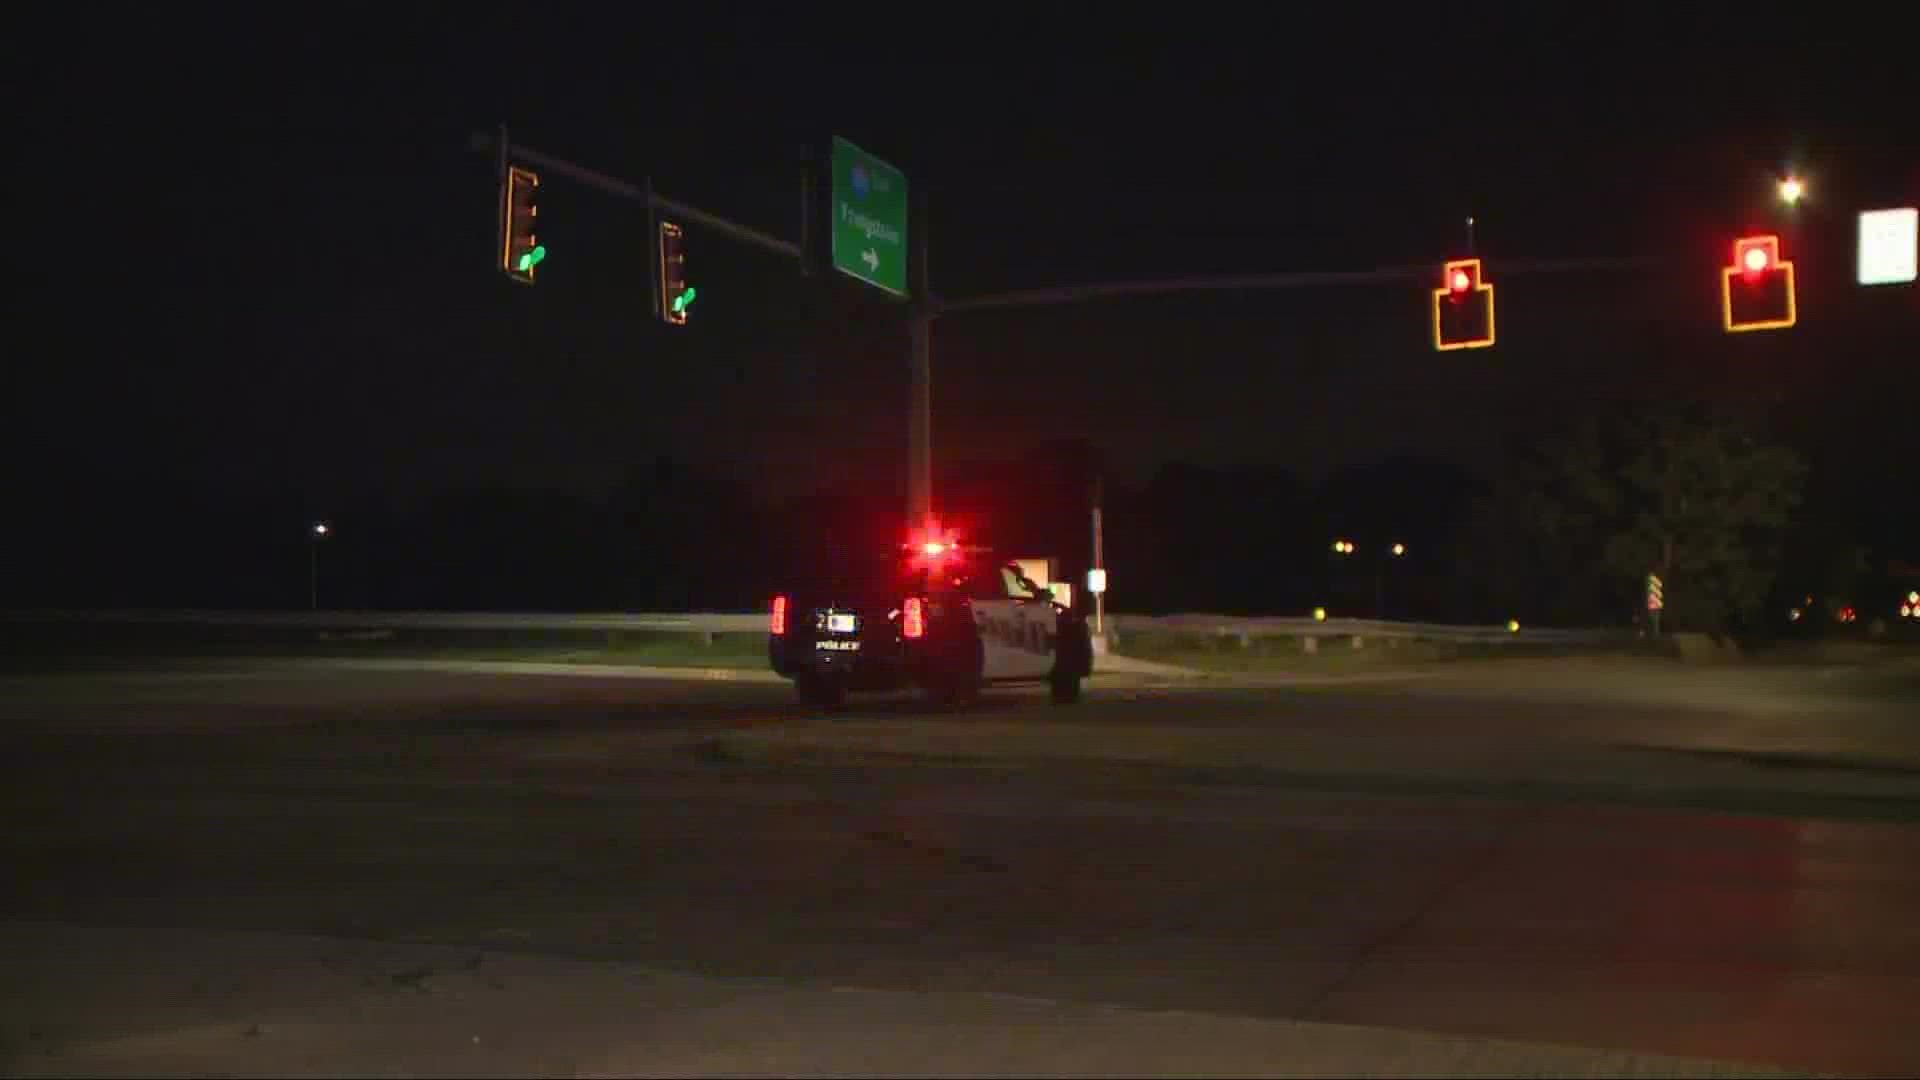 A section of Tiedeman Road has been closed on Monday night after a police chase and crash near the I-480 intersection.